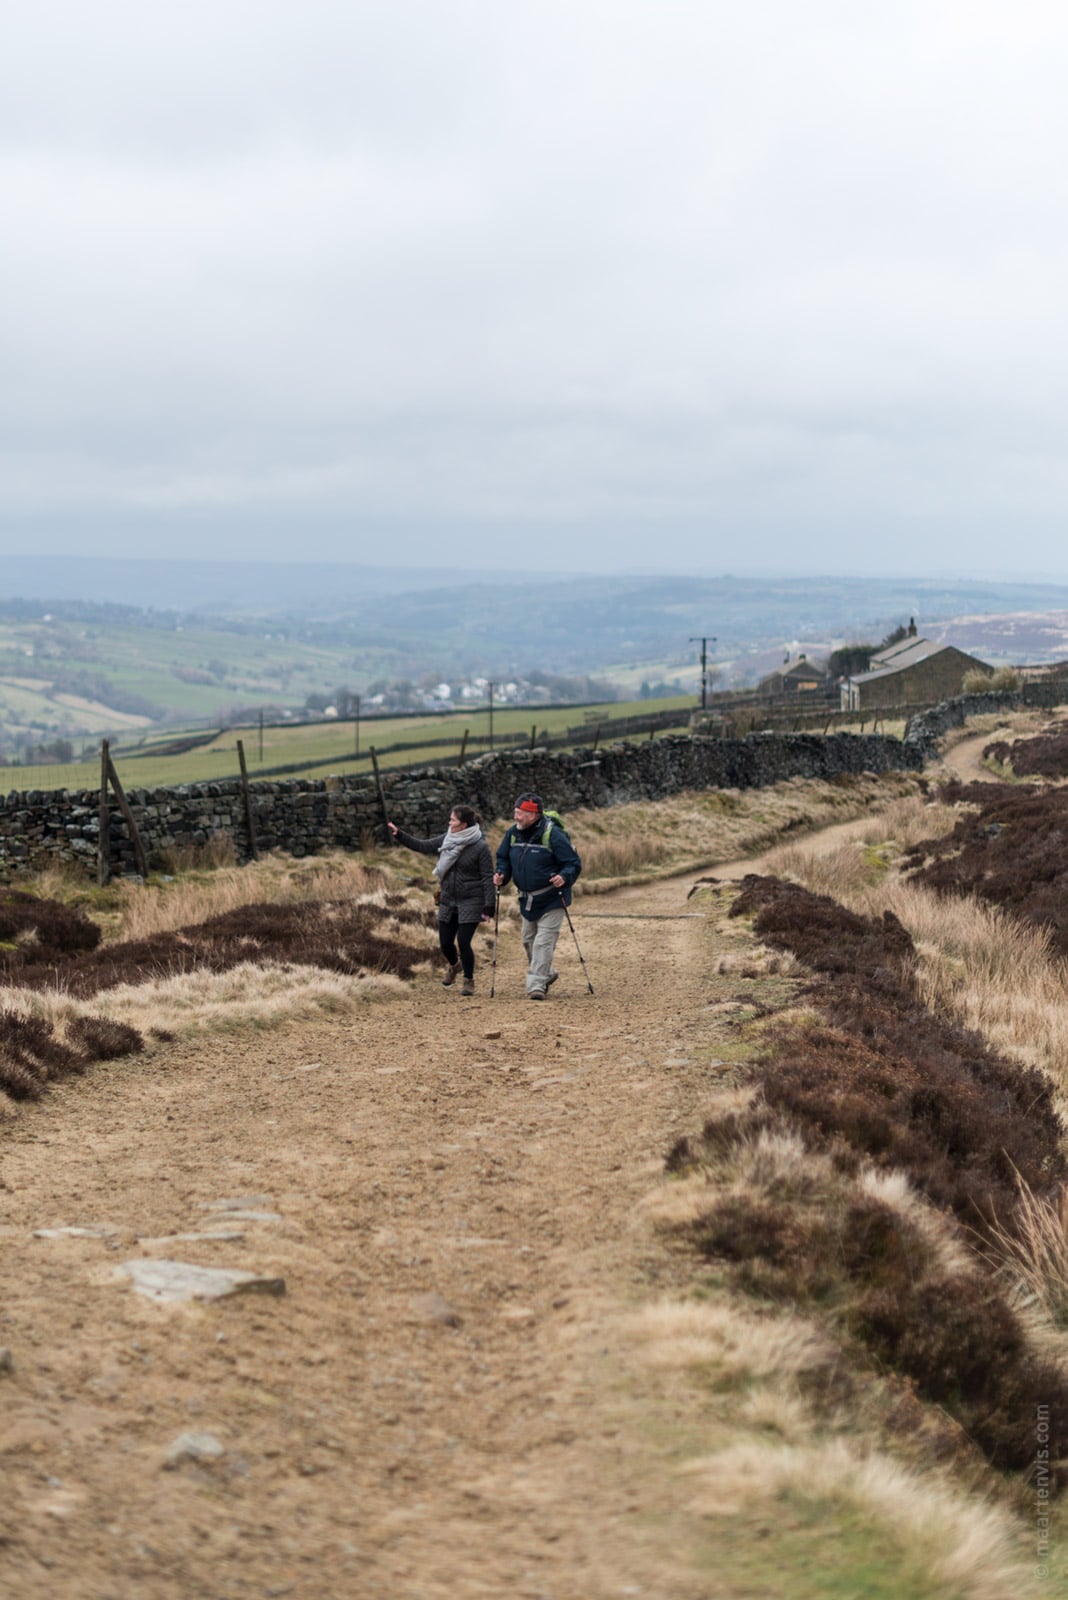 20160324 8097 - Hiking on the Moors with the Brontë sisters